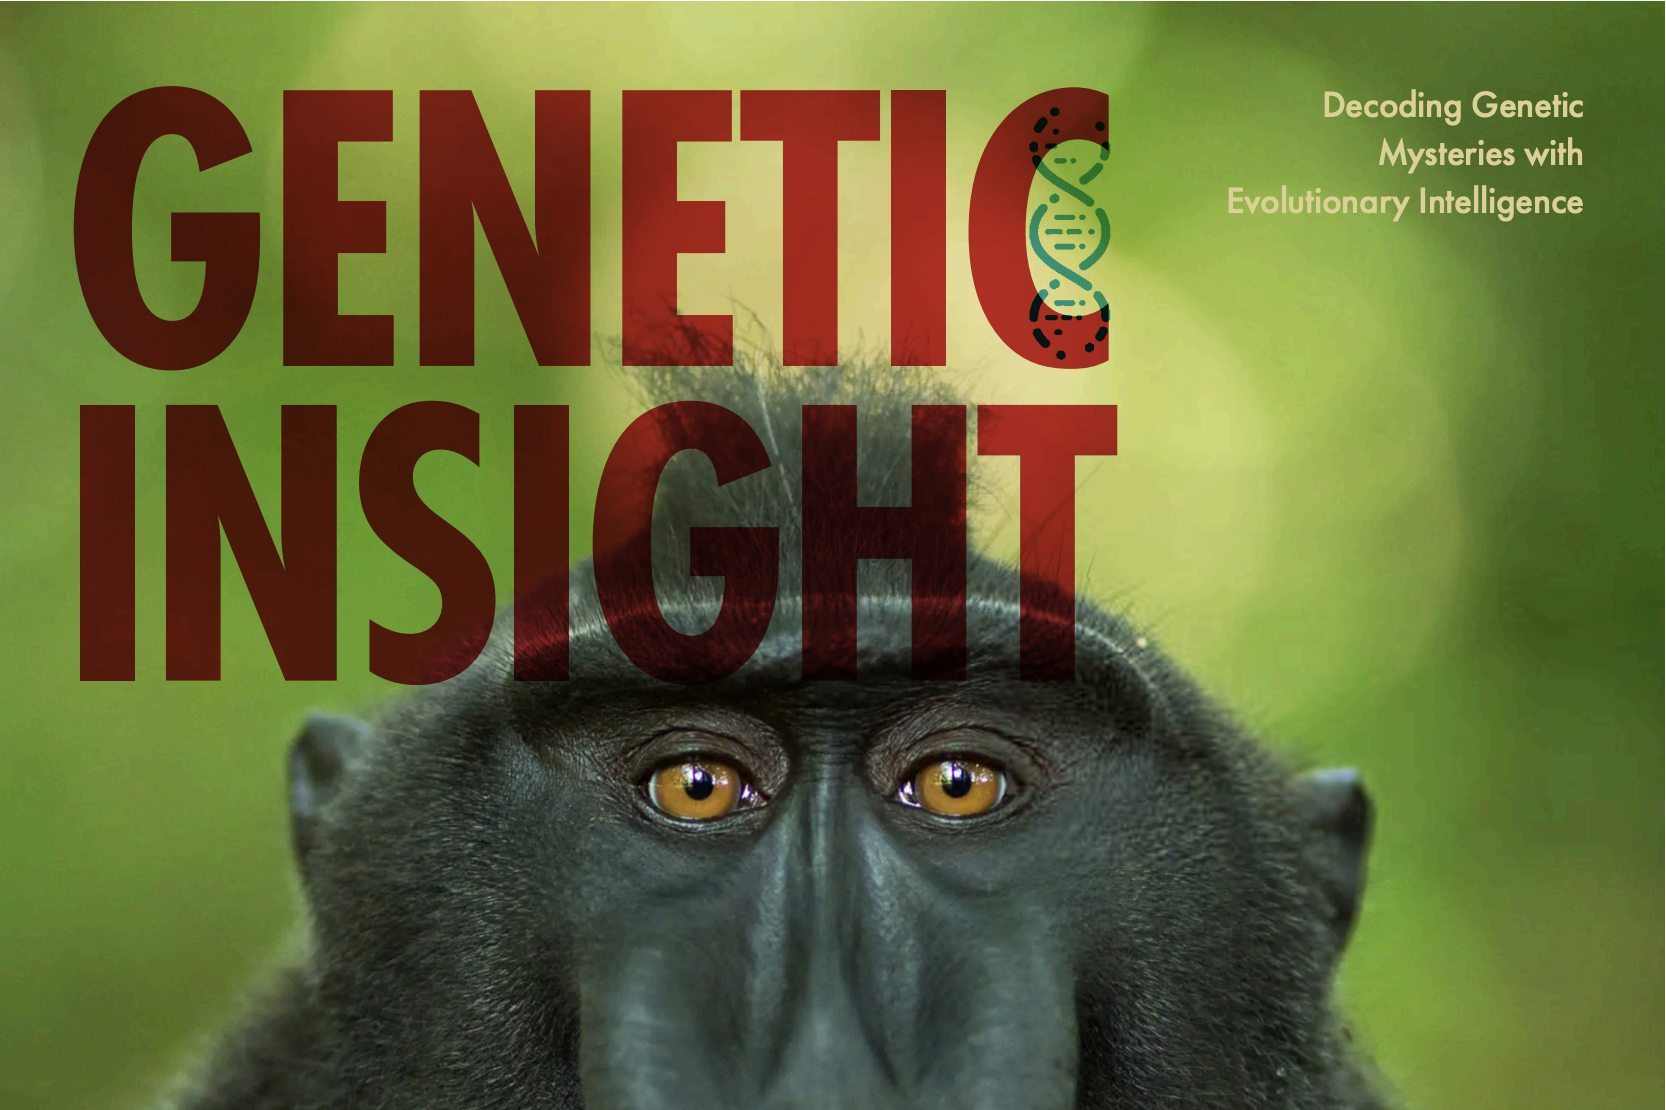 Decoding genetic mysteries with evolutionary intelligence